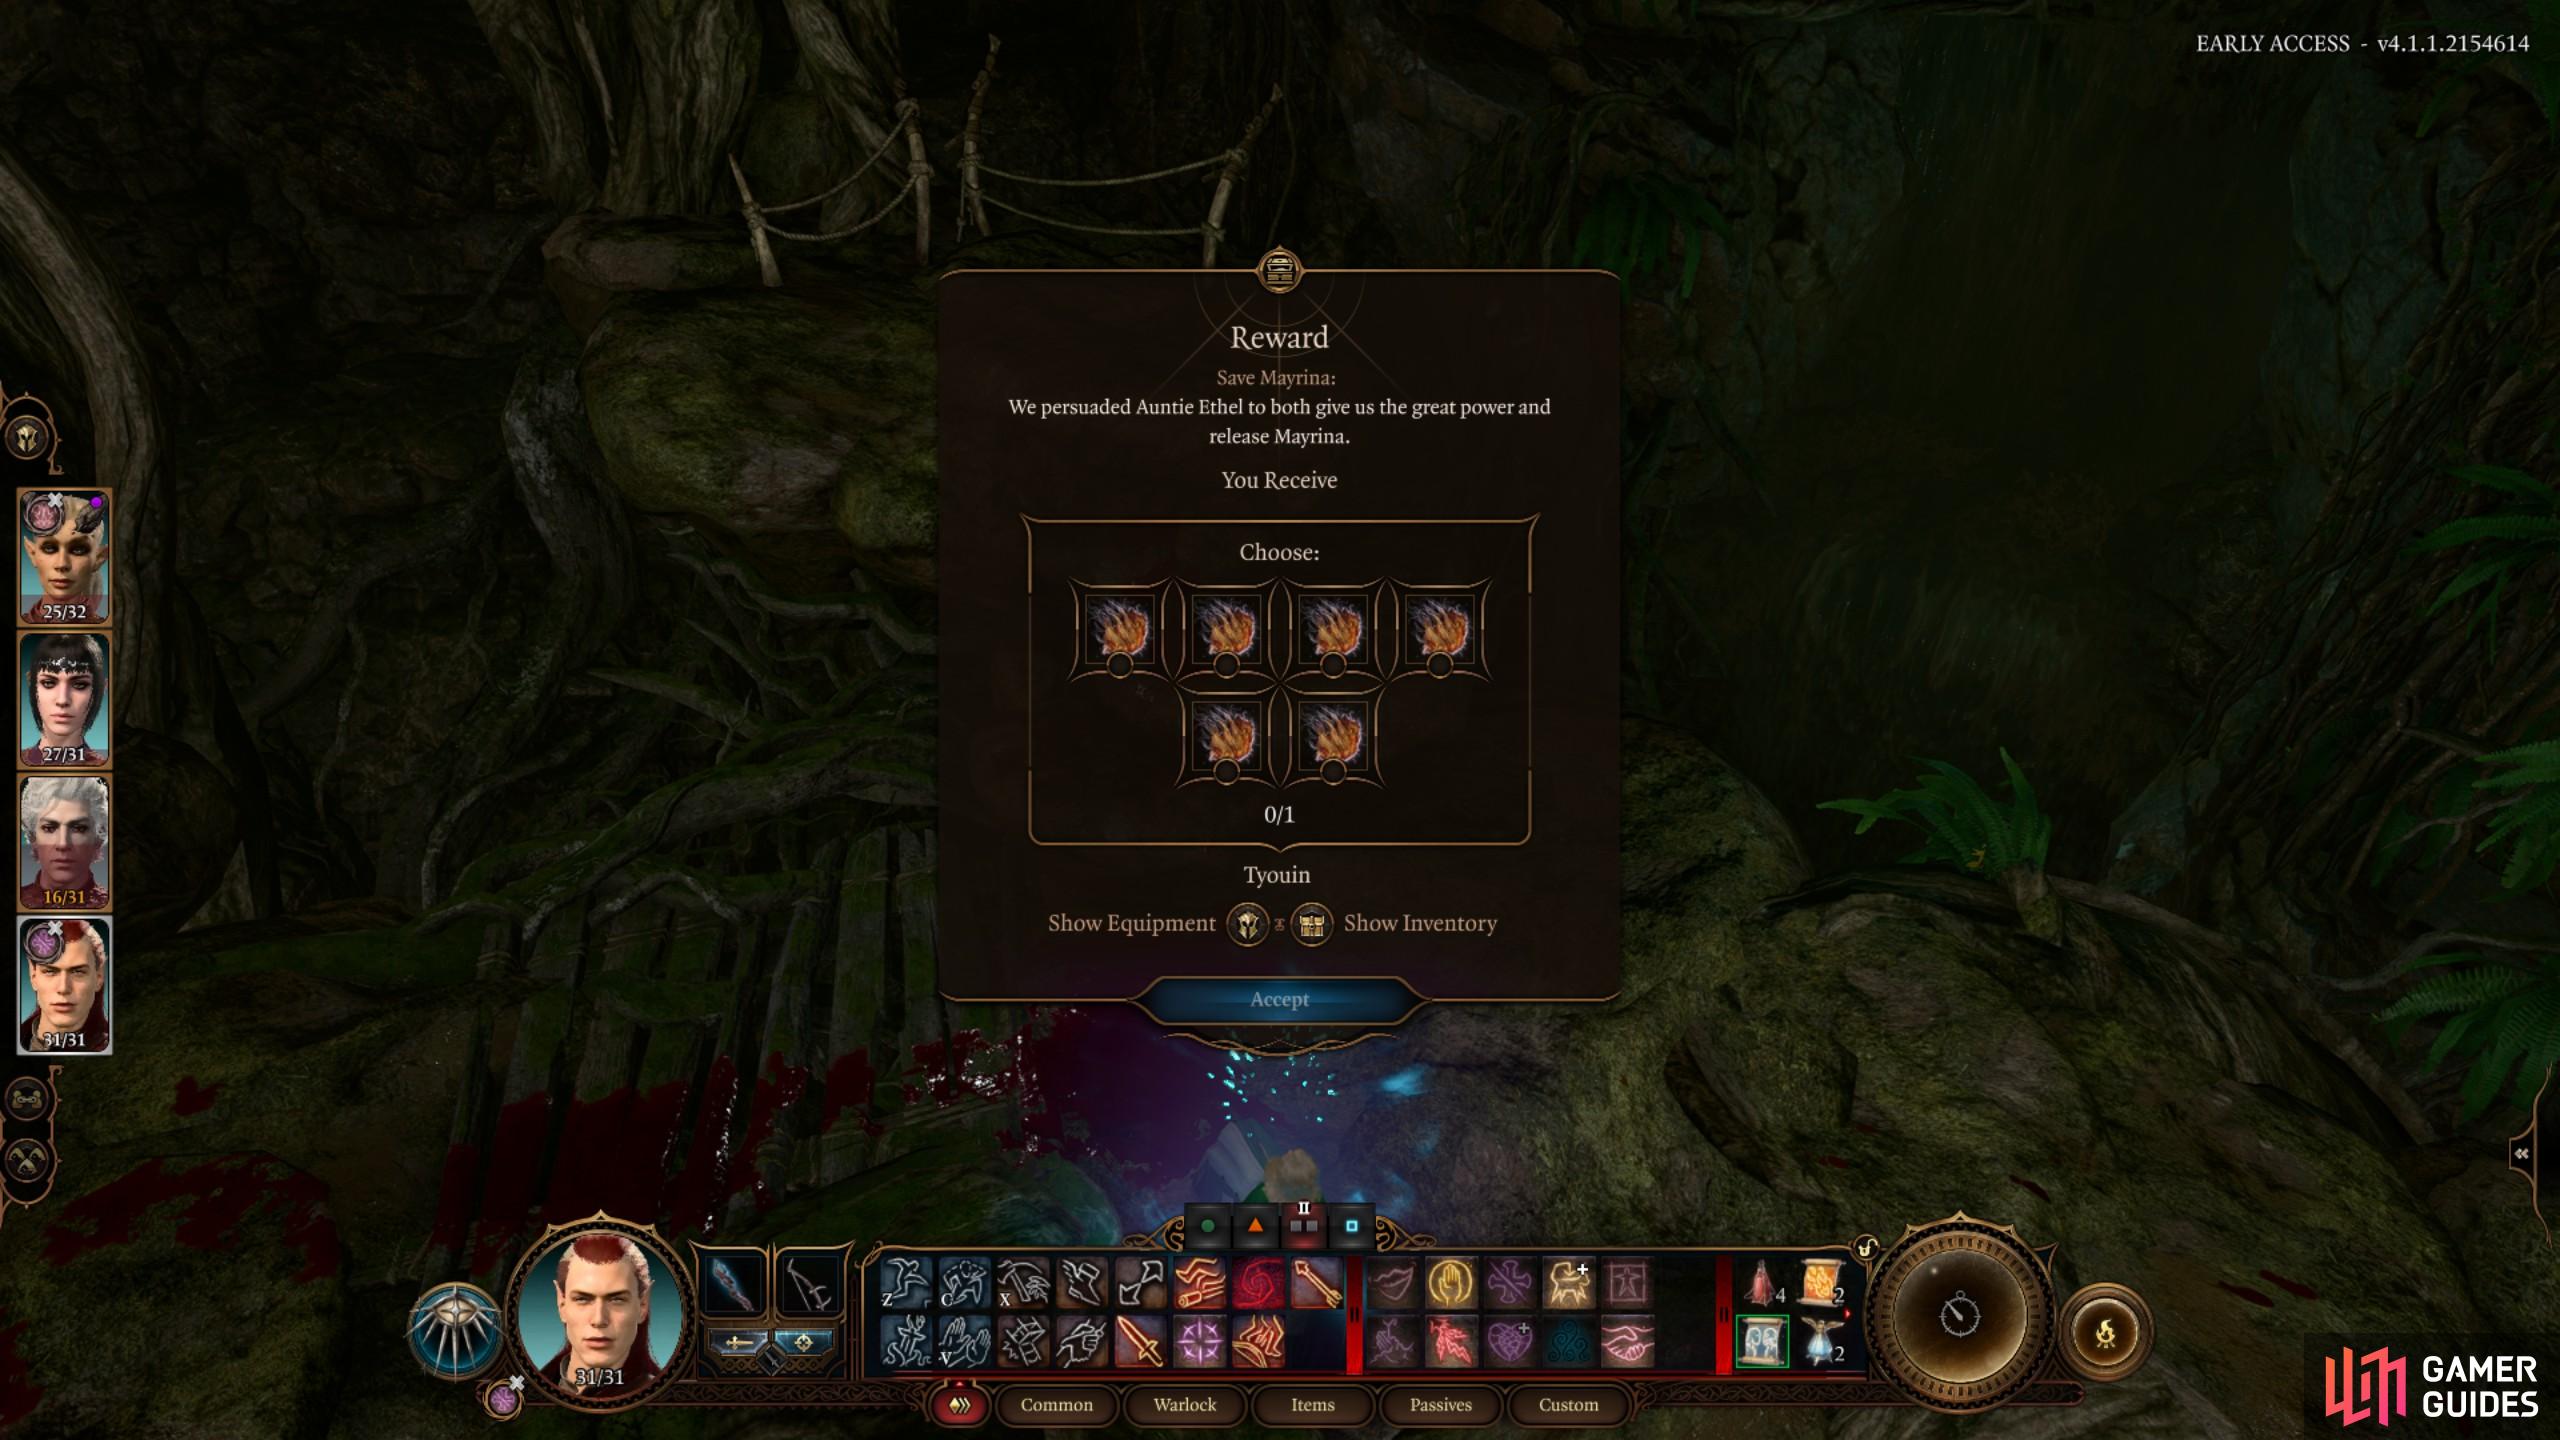 If you take the deal where the Hag flees, you can get a Ability Score upgrade, by consuming an Hag Hair of your choice